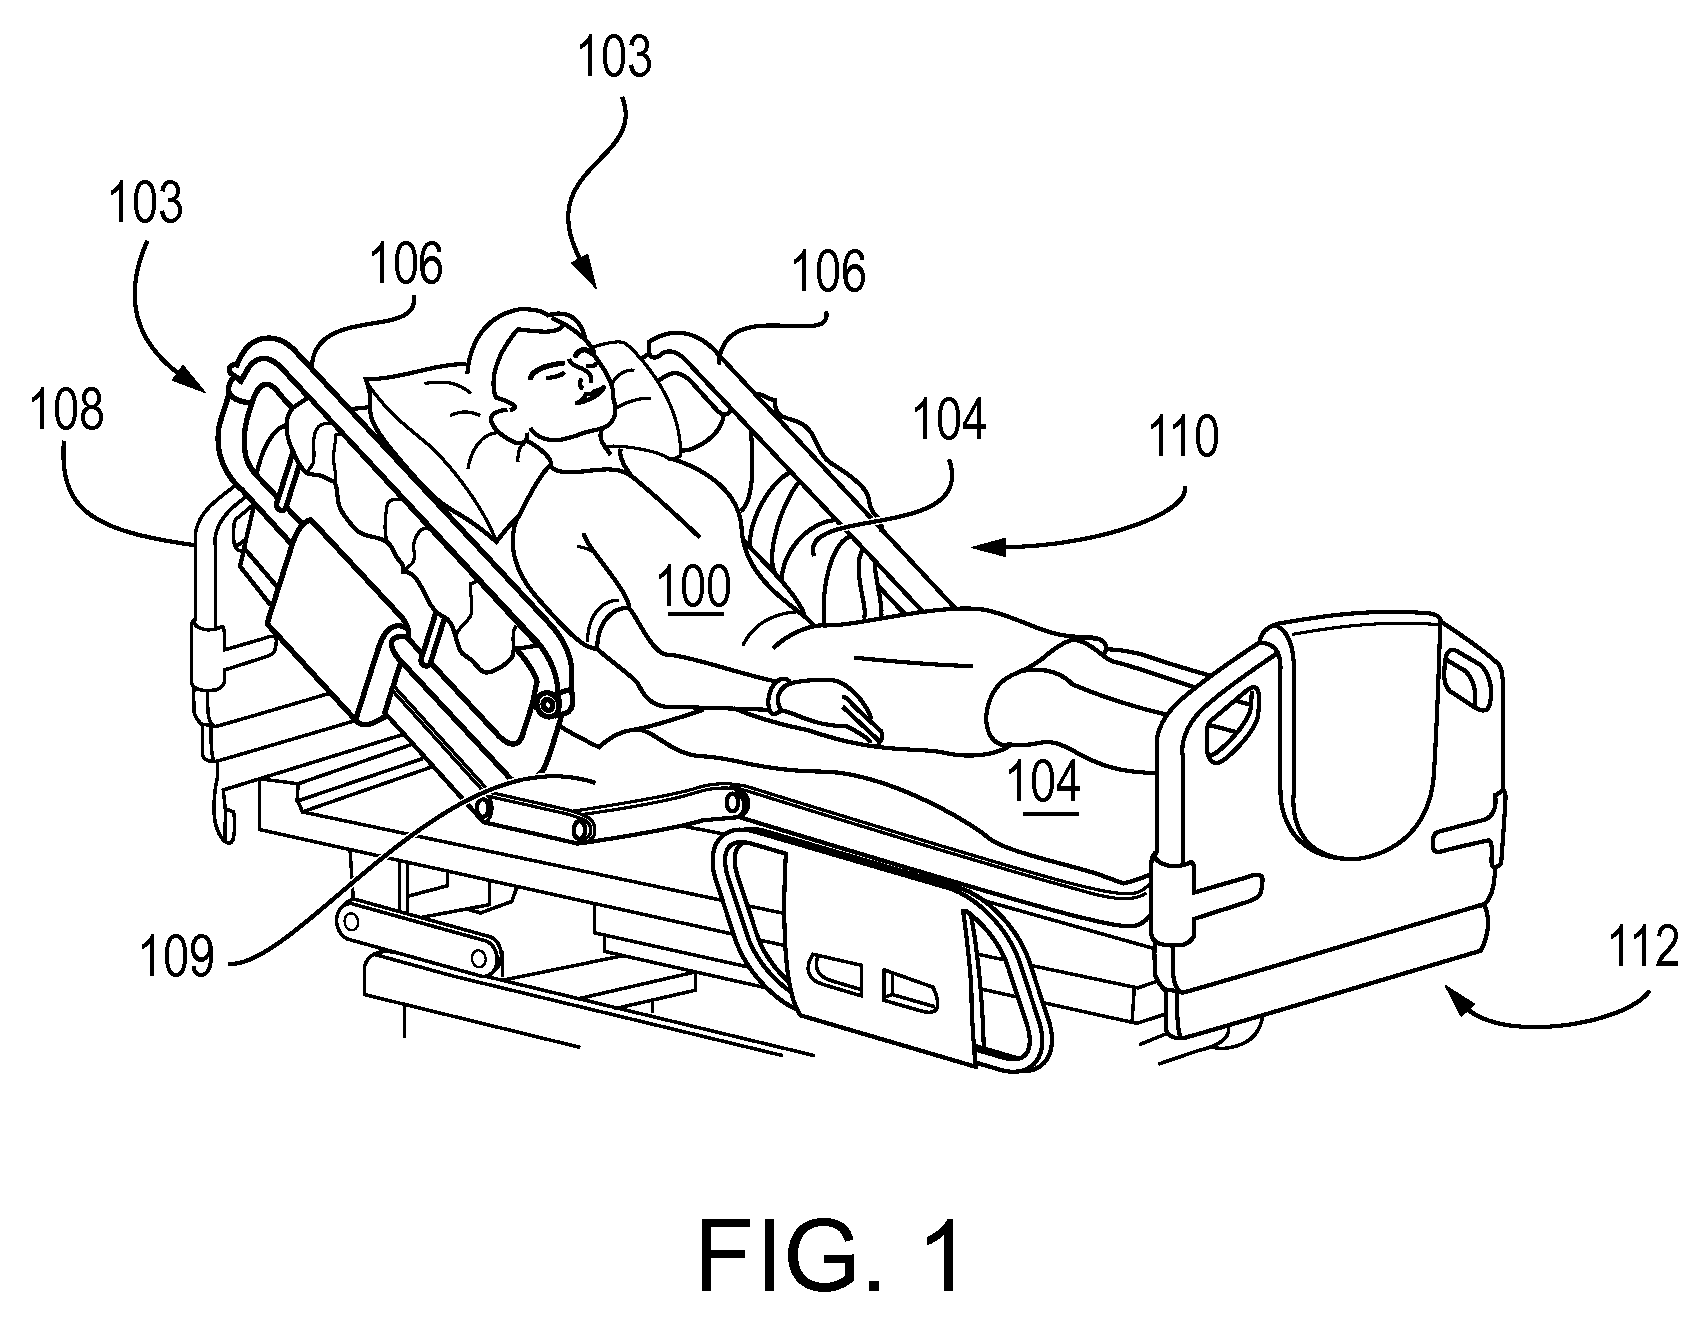 Device and method for positioning patients